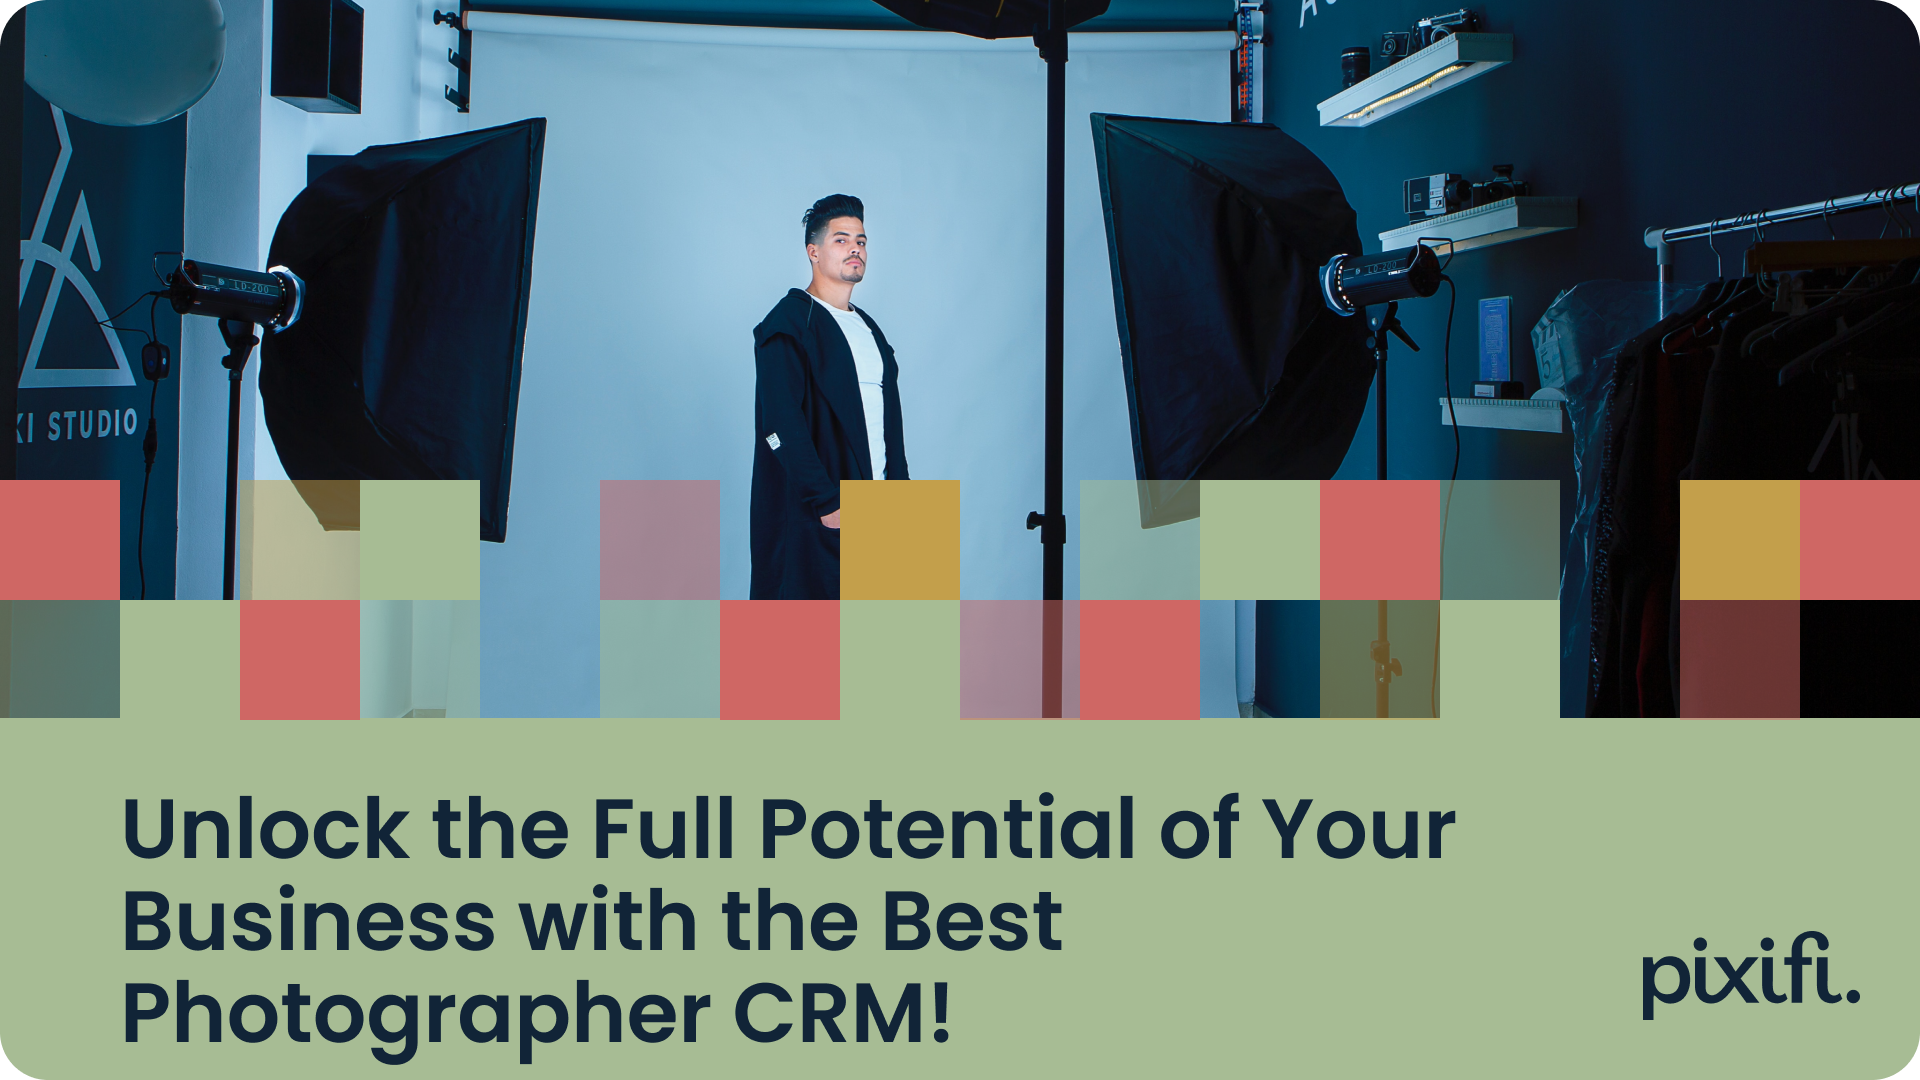 Unlock the Full Potential of Your Business with the Best Photographer CRM!